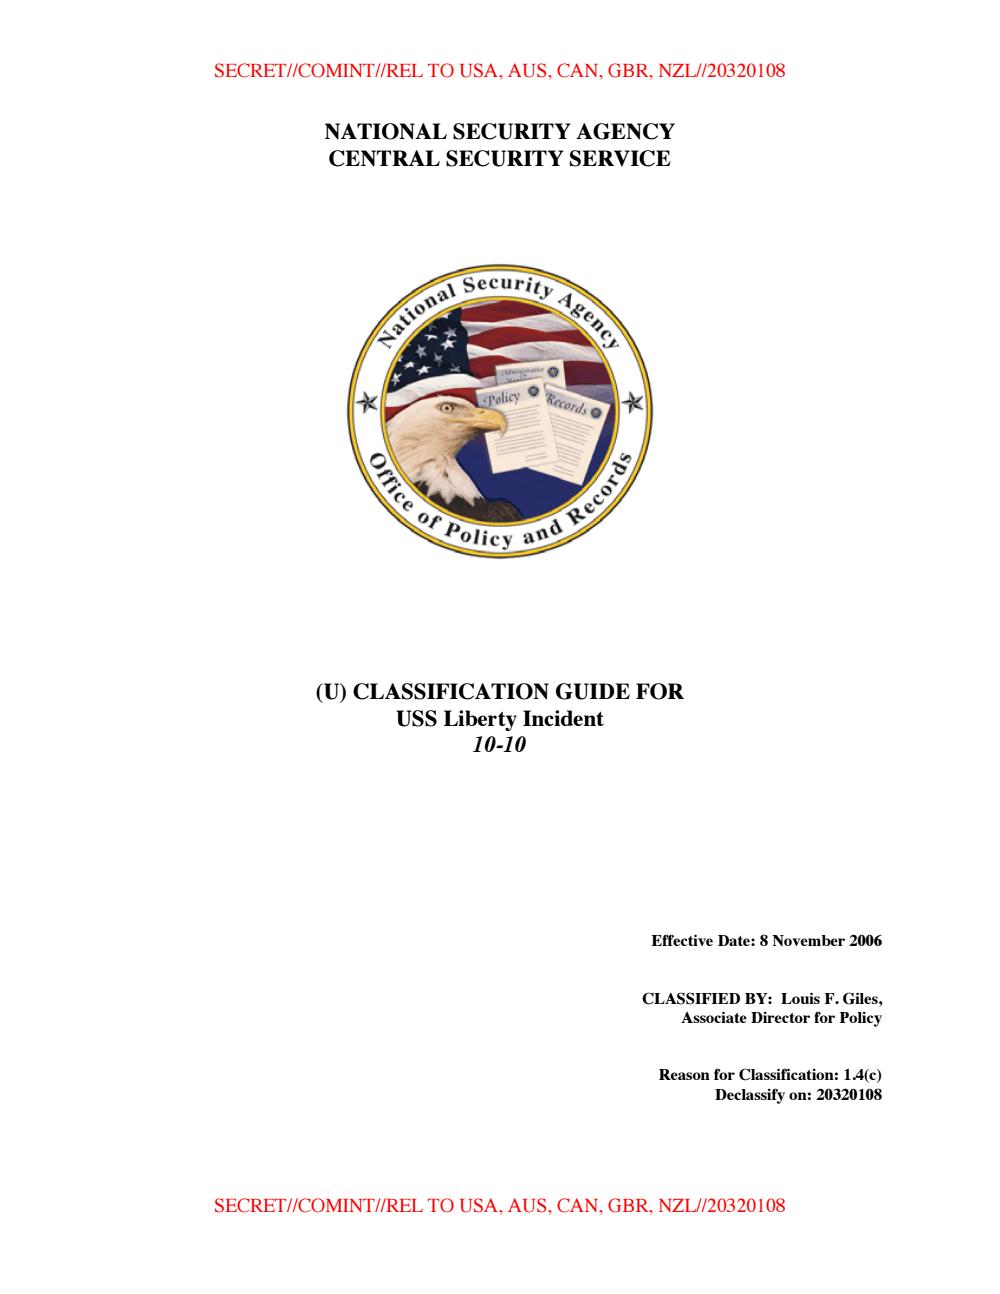 Page 1 from NSA’s USS Liberty Incident Classification Guide